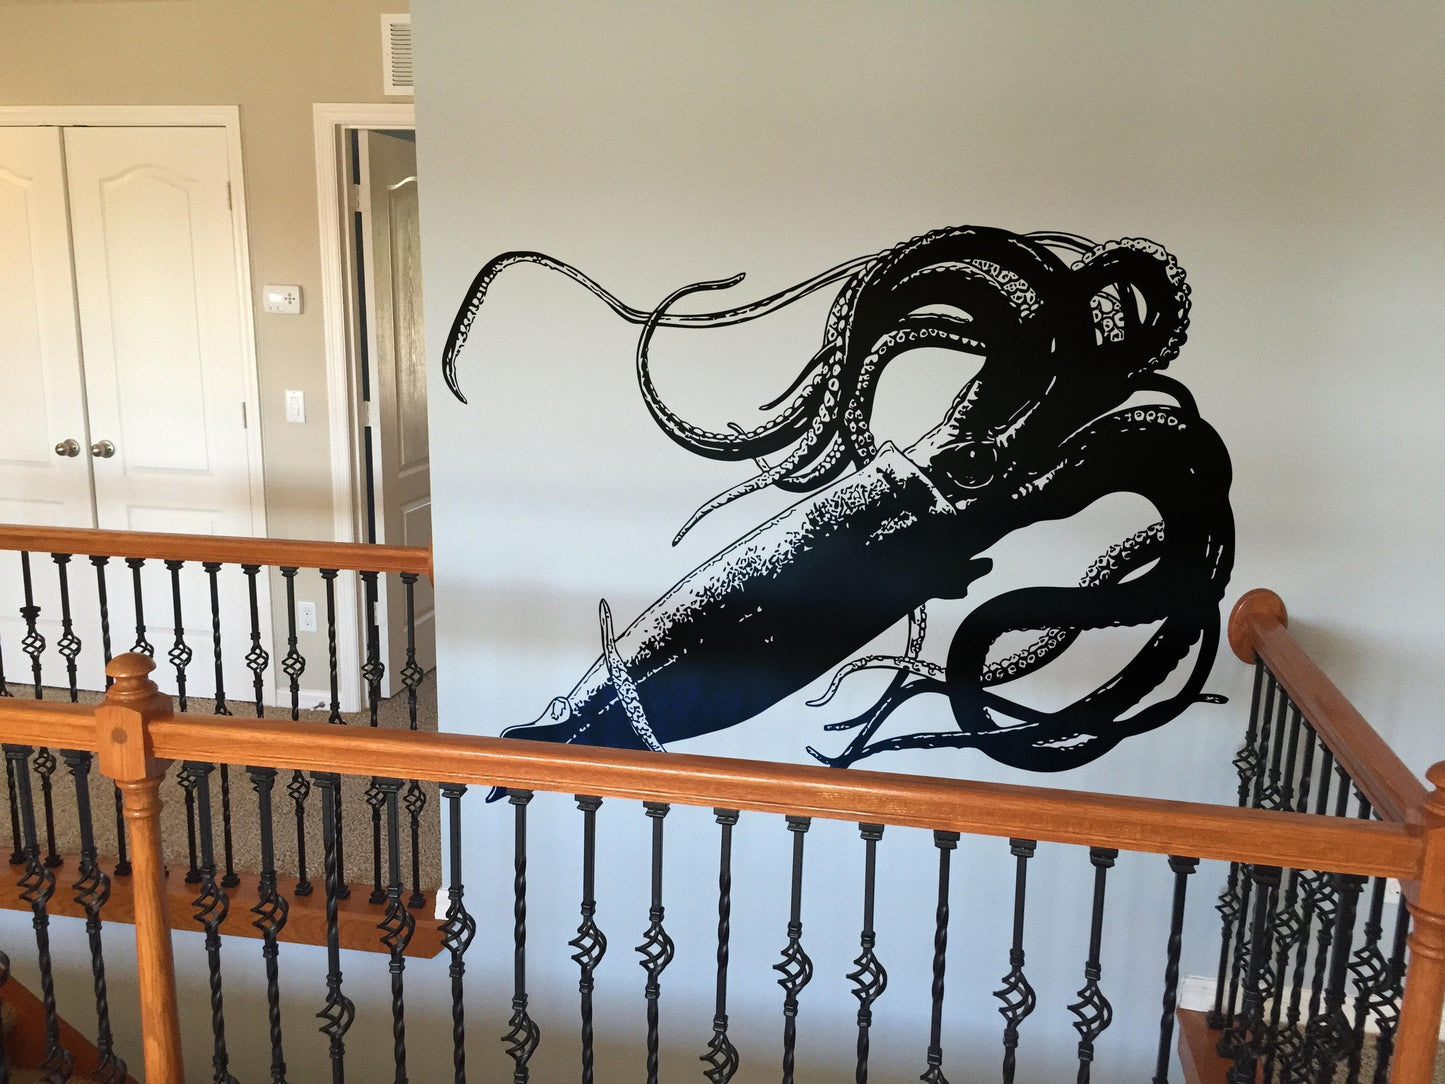 Giant Squid Wall Decal Sticker. #5336